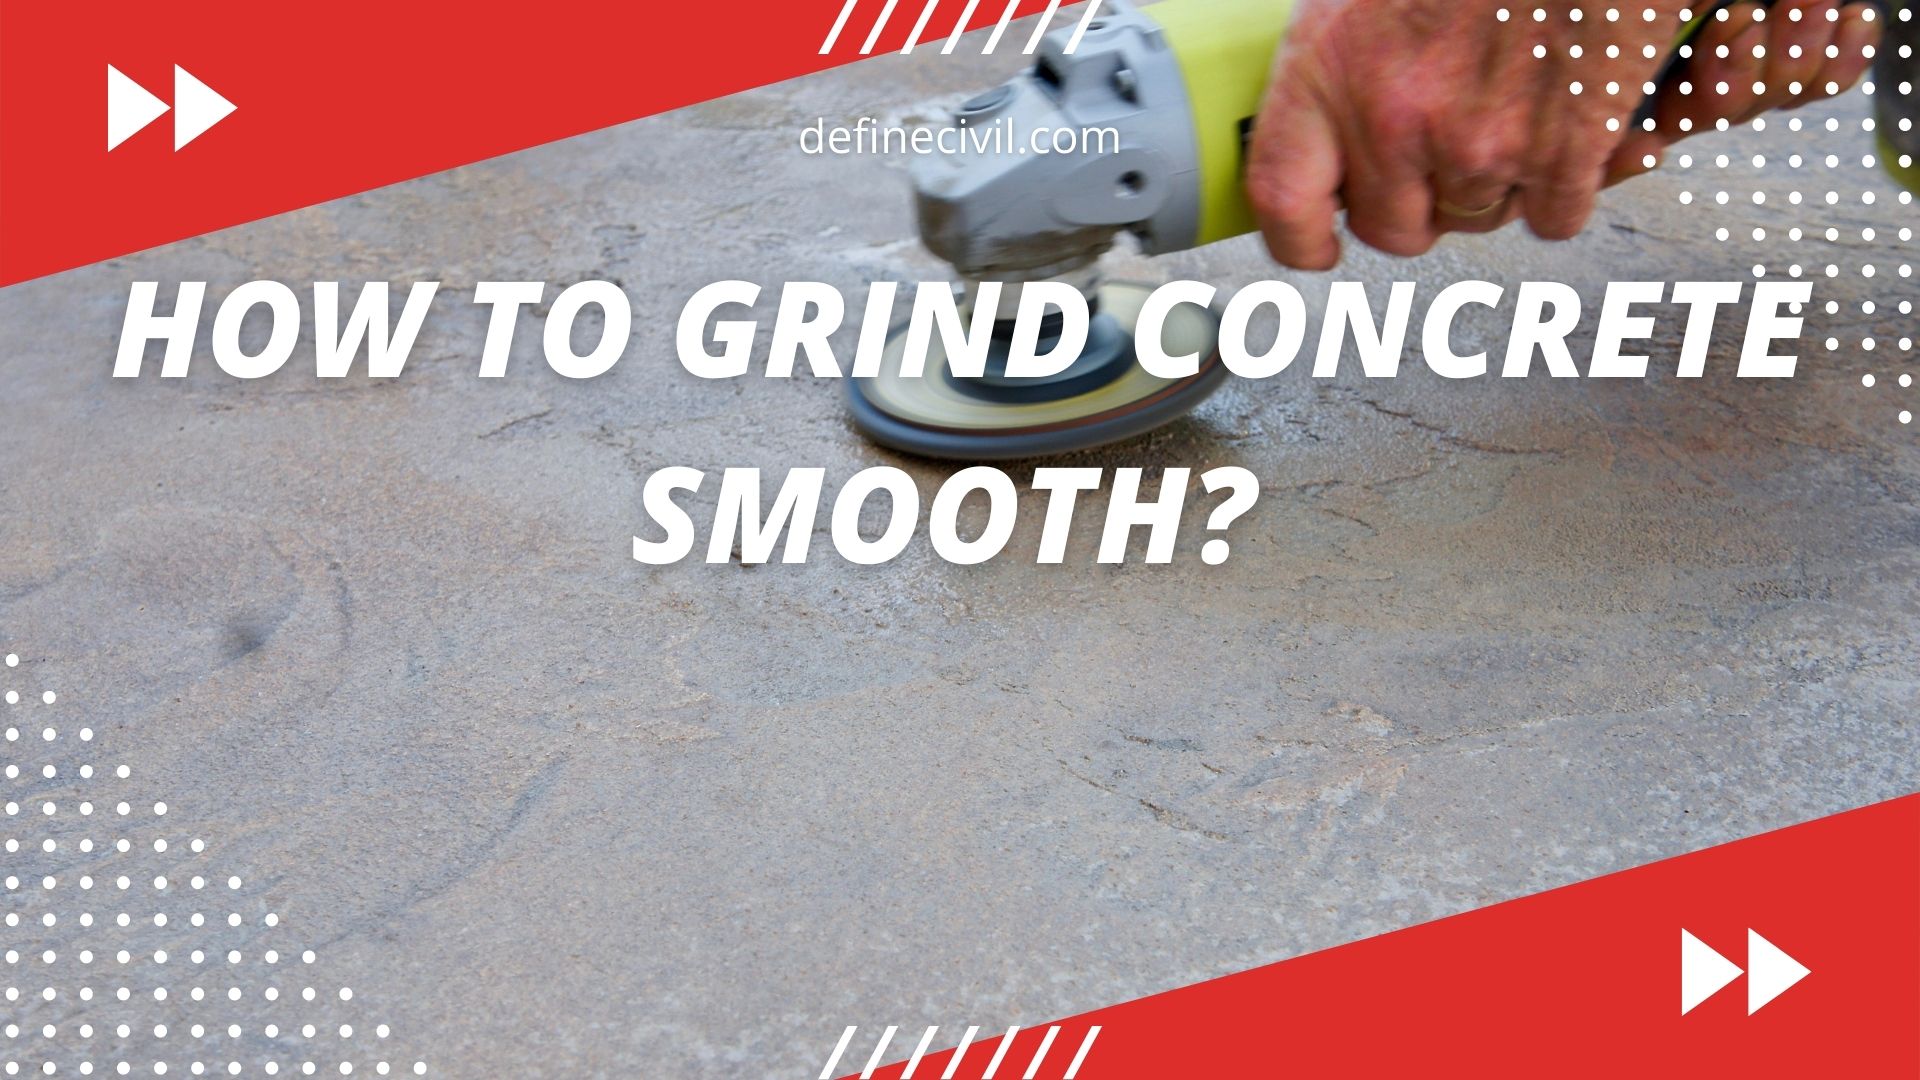 How to grind concrete smooth?